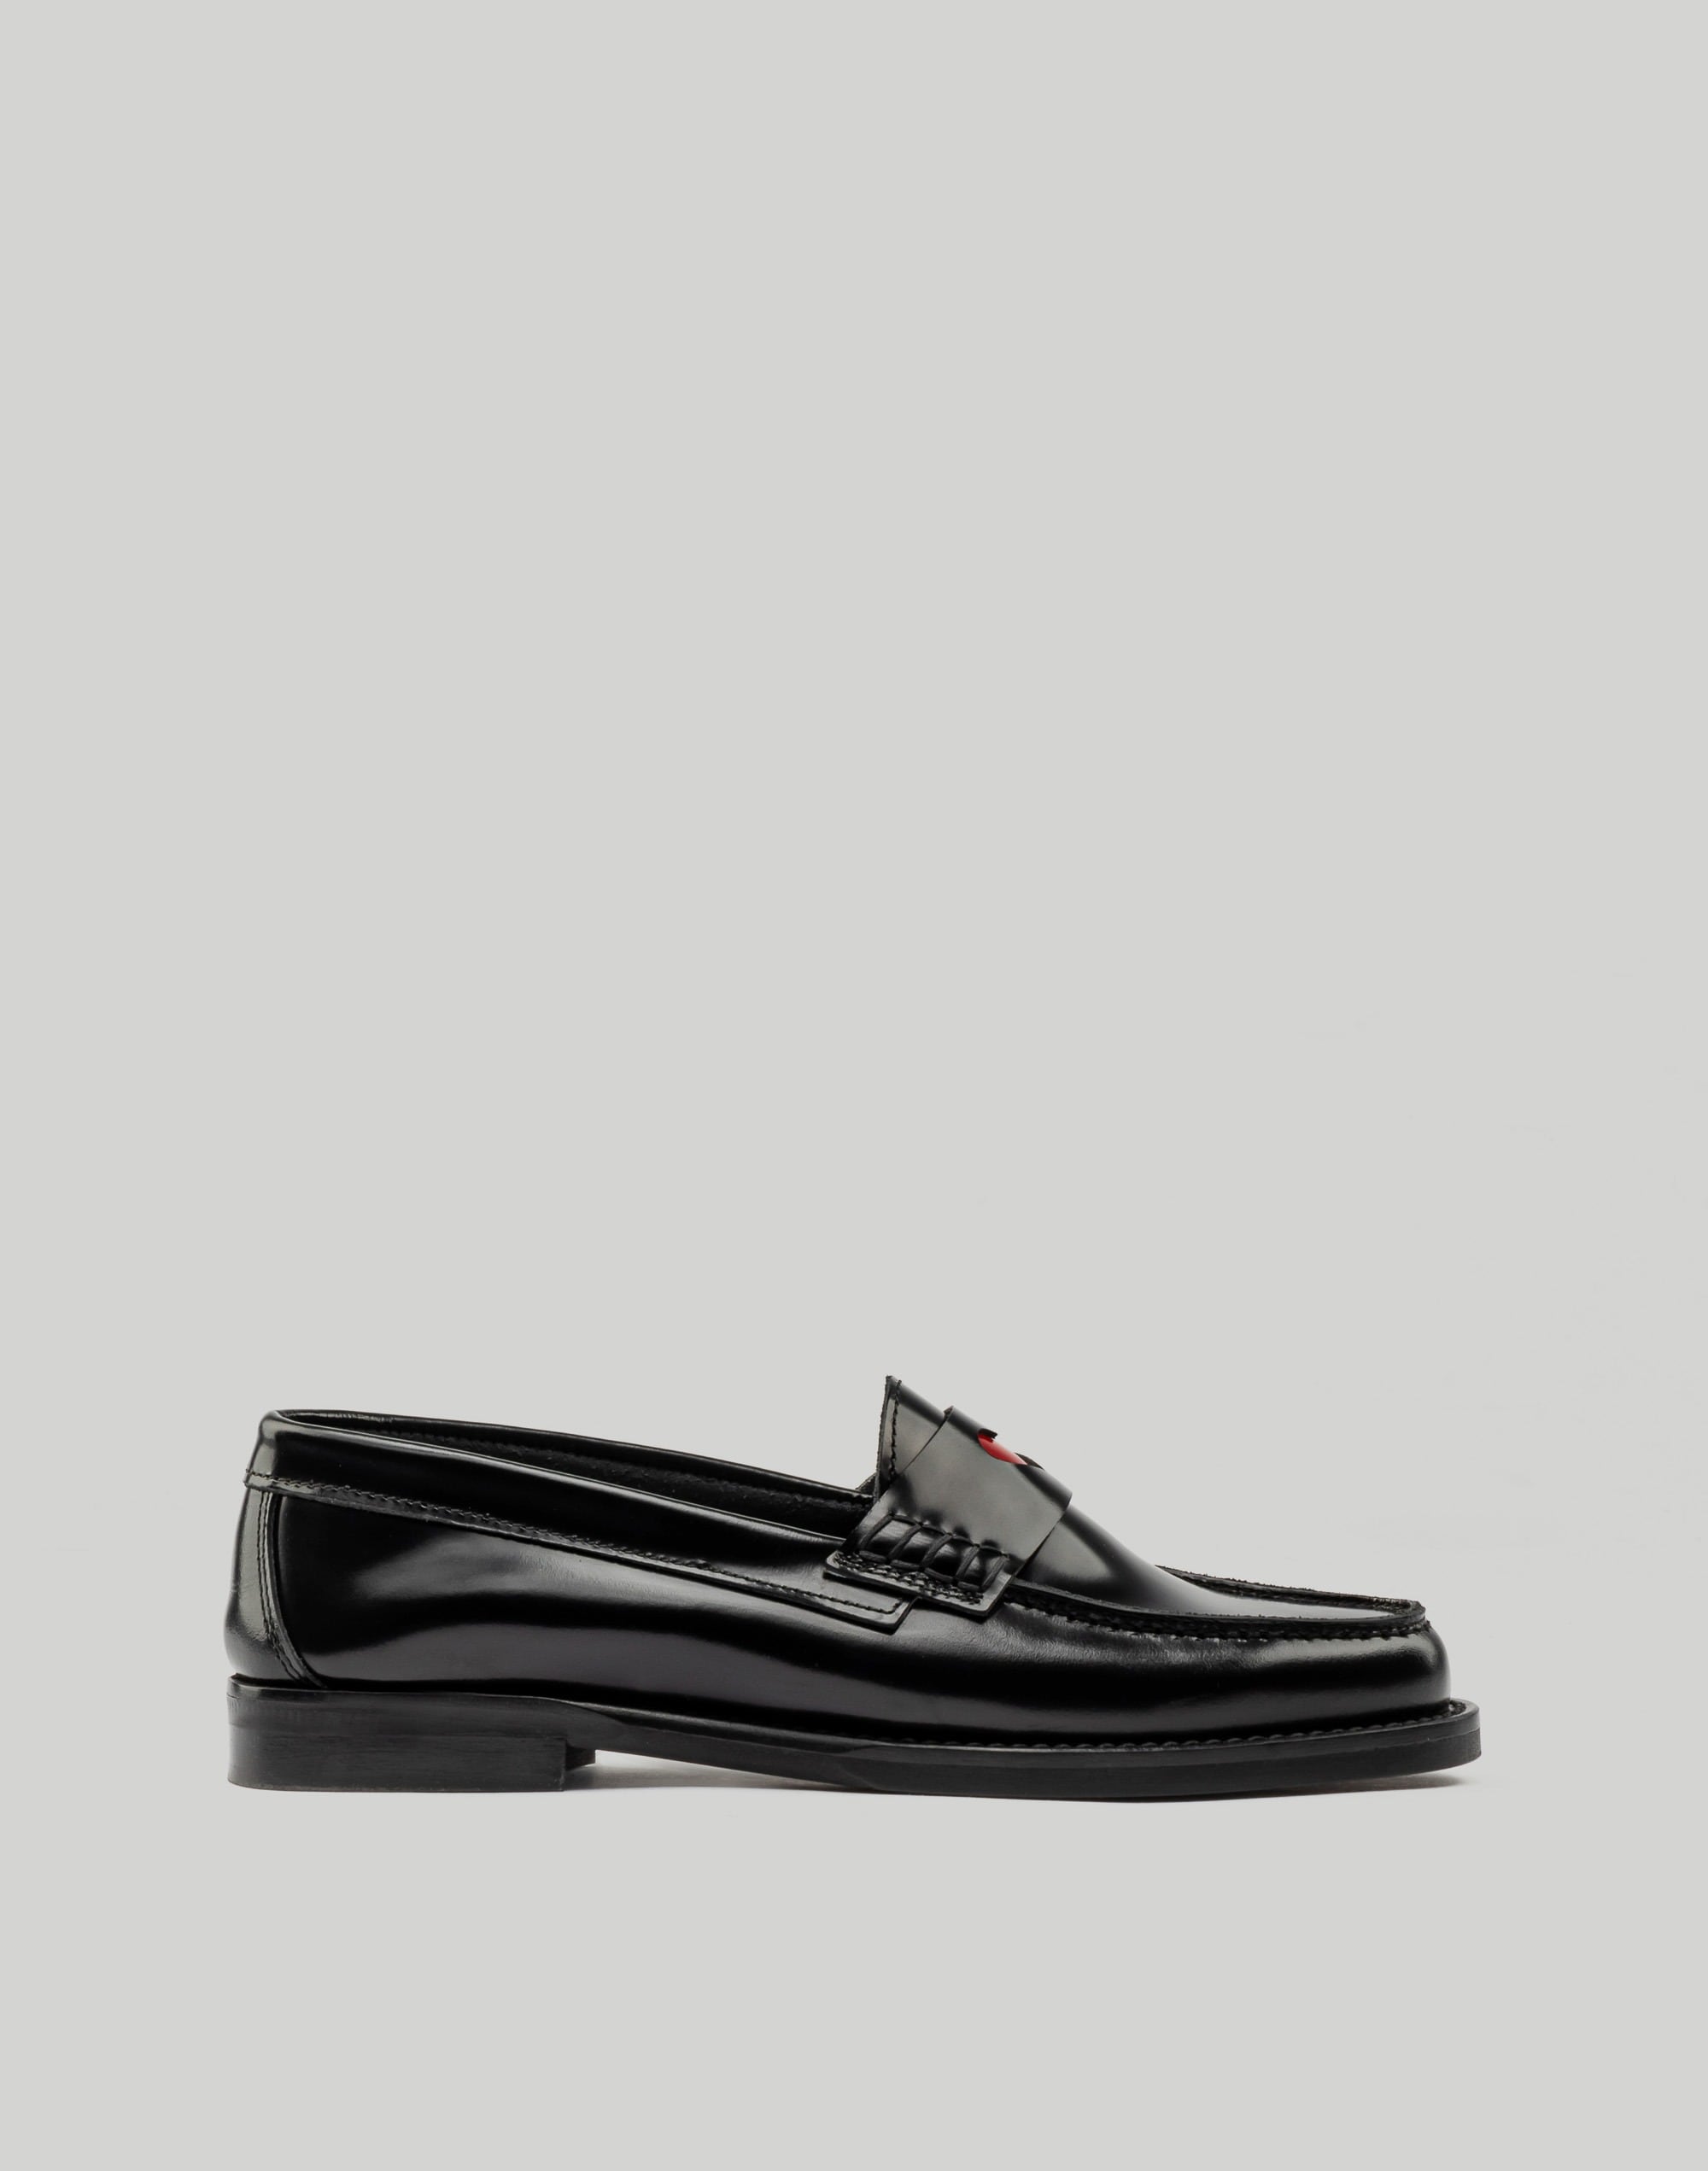 Maguire Napoli Loafers Black Heart